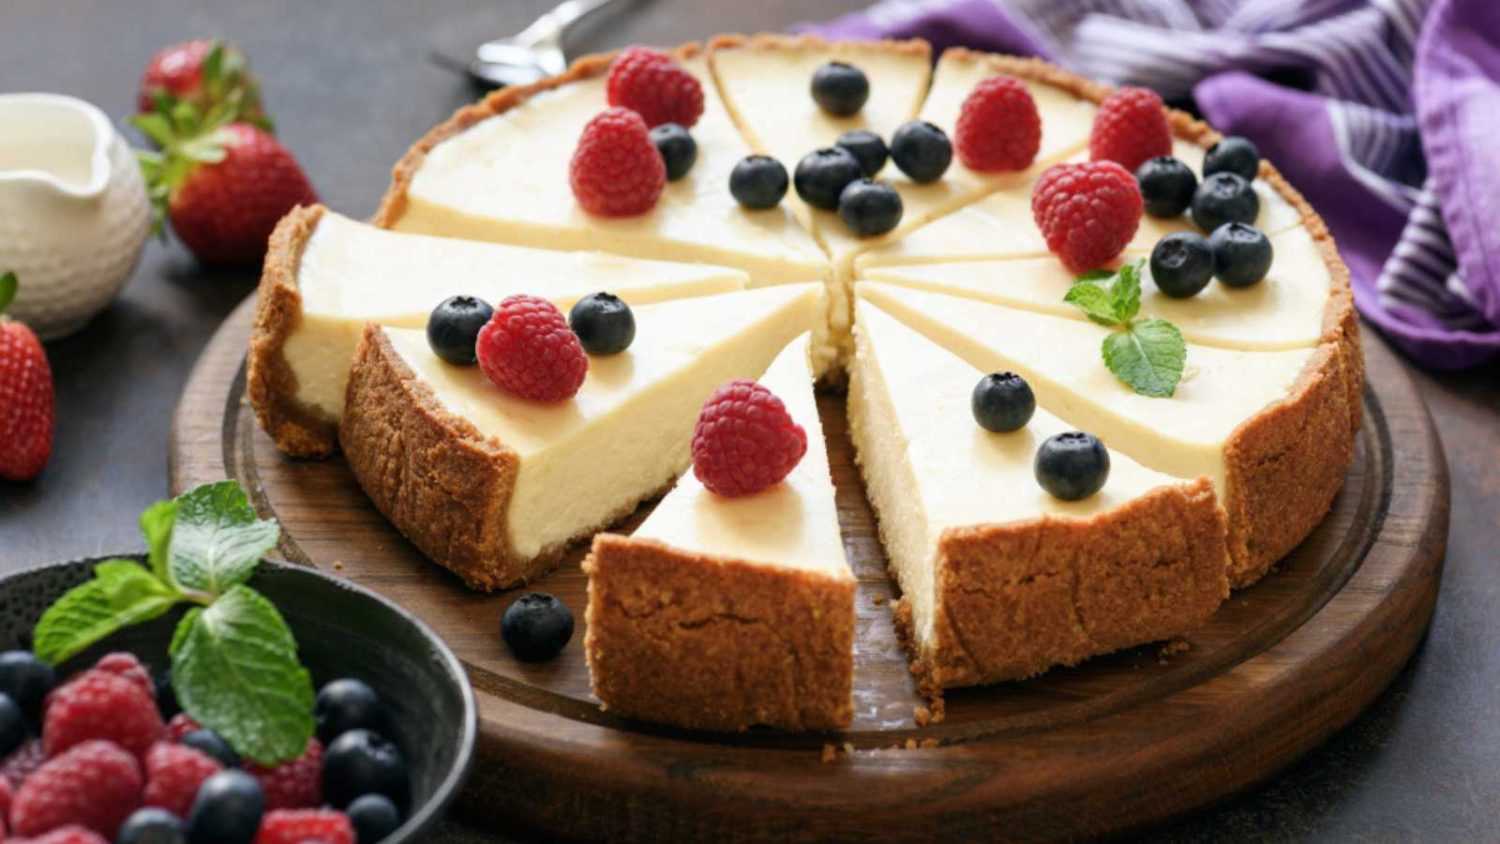 Classic plain New York Cheesecake sliced on wooden board, closeup view, selective focus